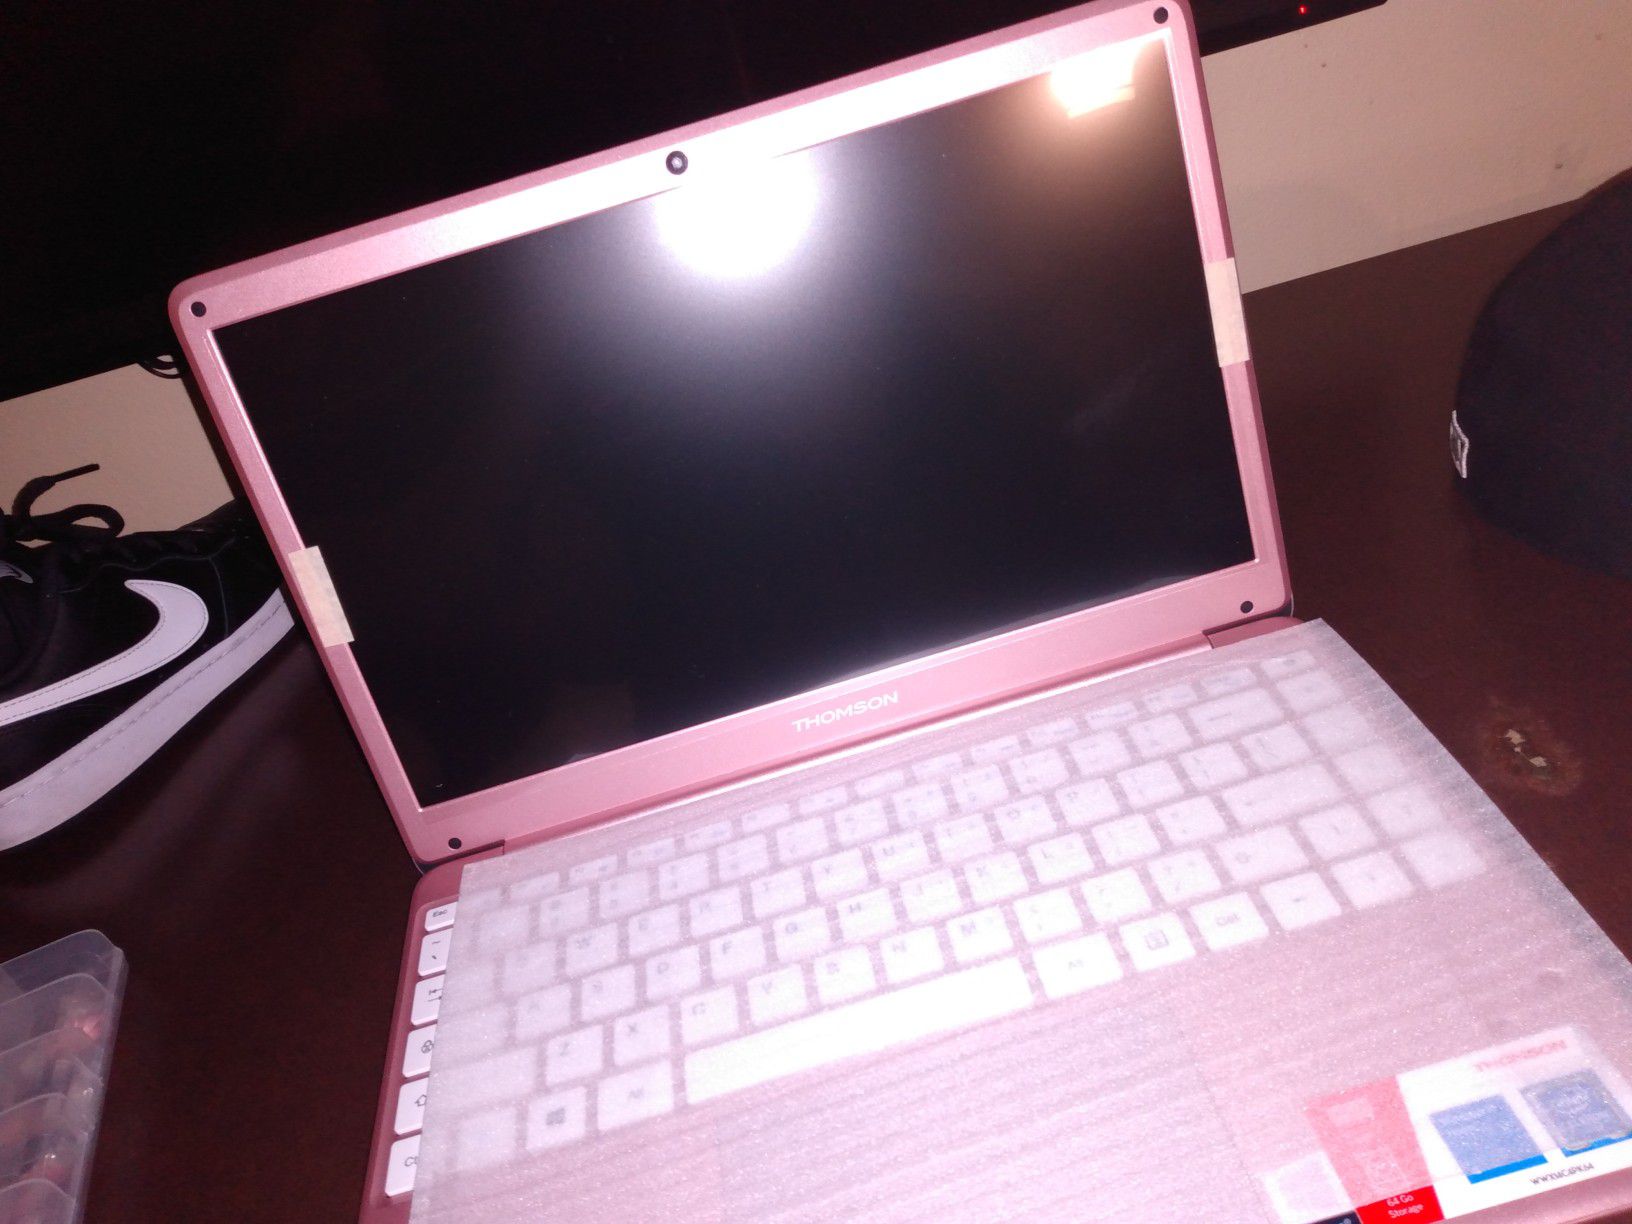 Laptop pink brand-new used it once